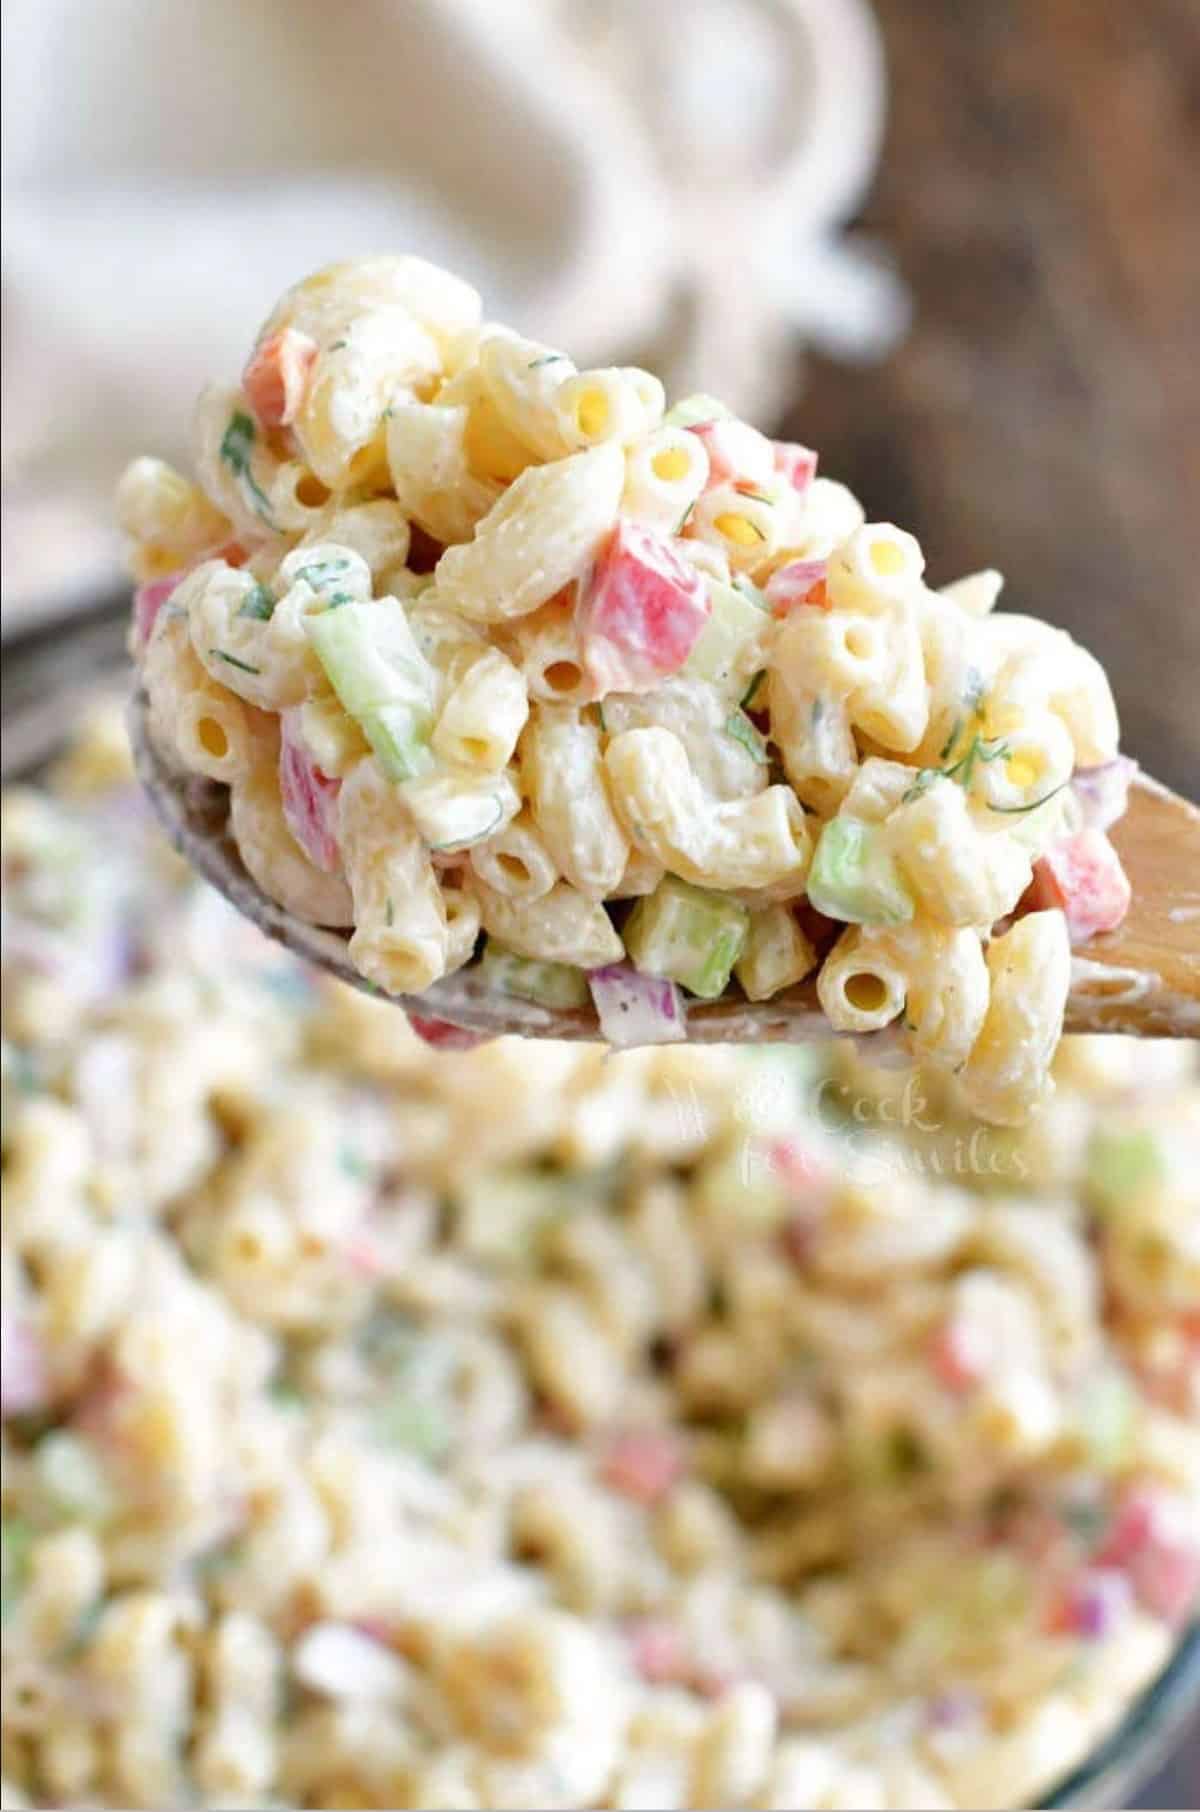 macaroni salad on a wooden spoon next to a bowl and a towel.